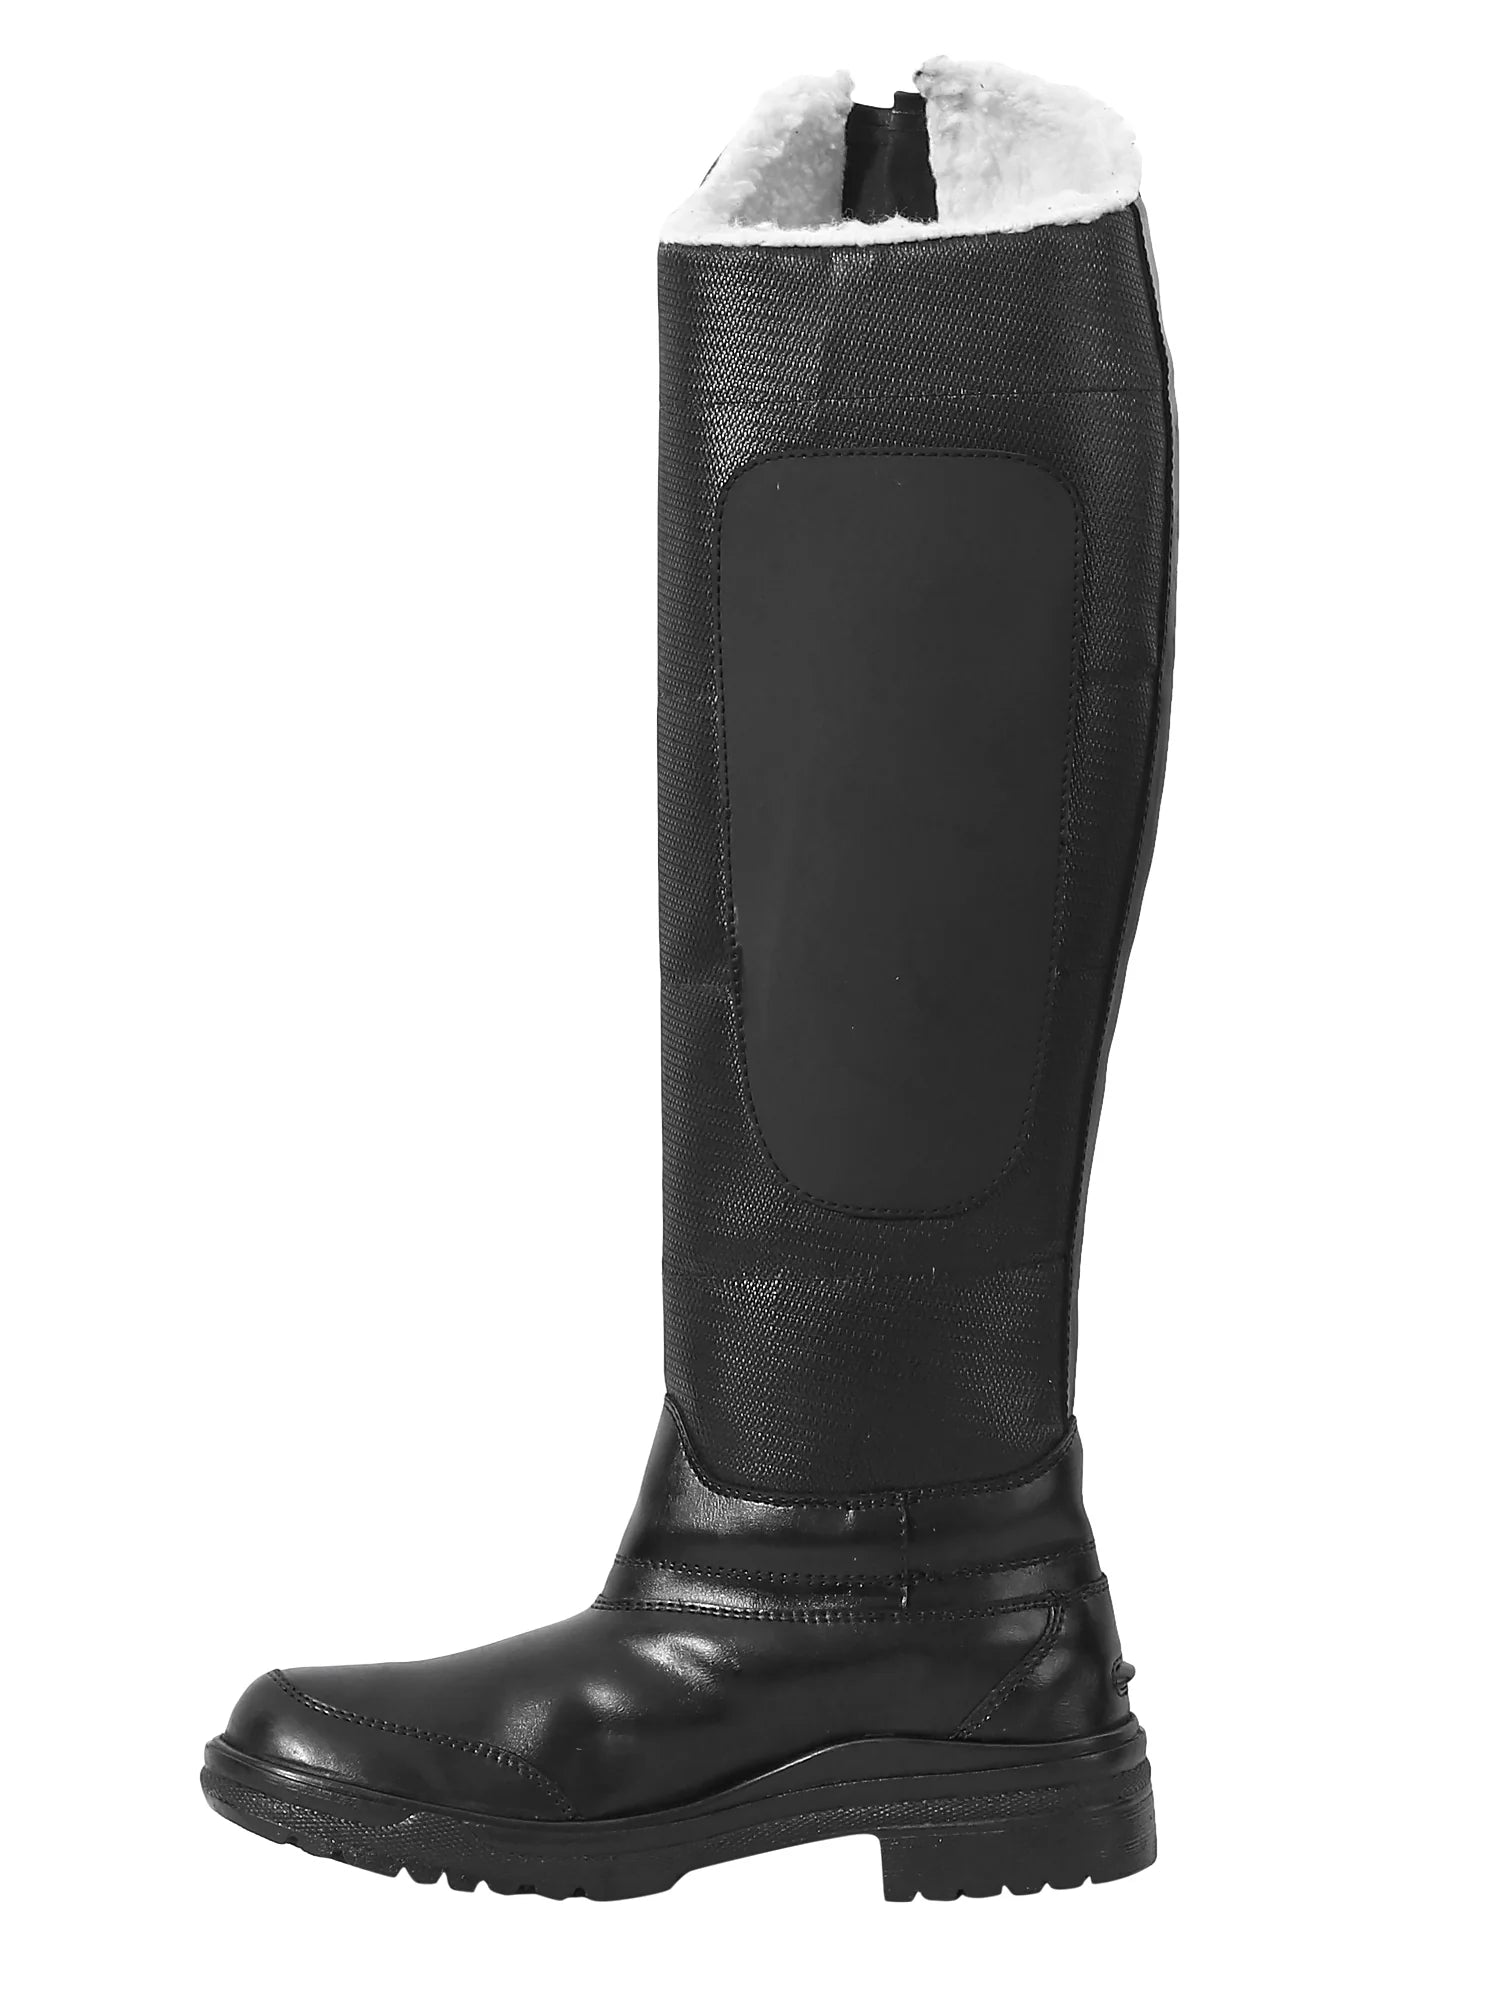 Tuffrider Tempest Tall Winter Boots - CLEARANCE